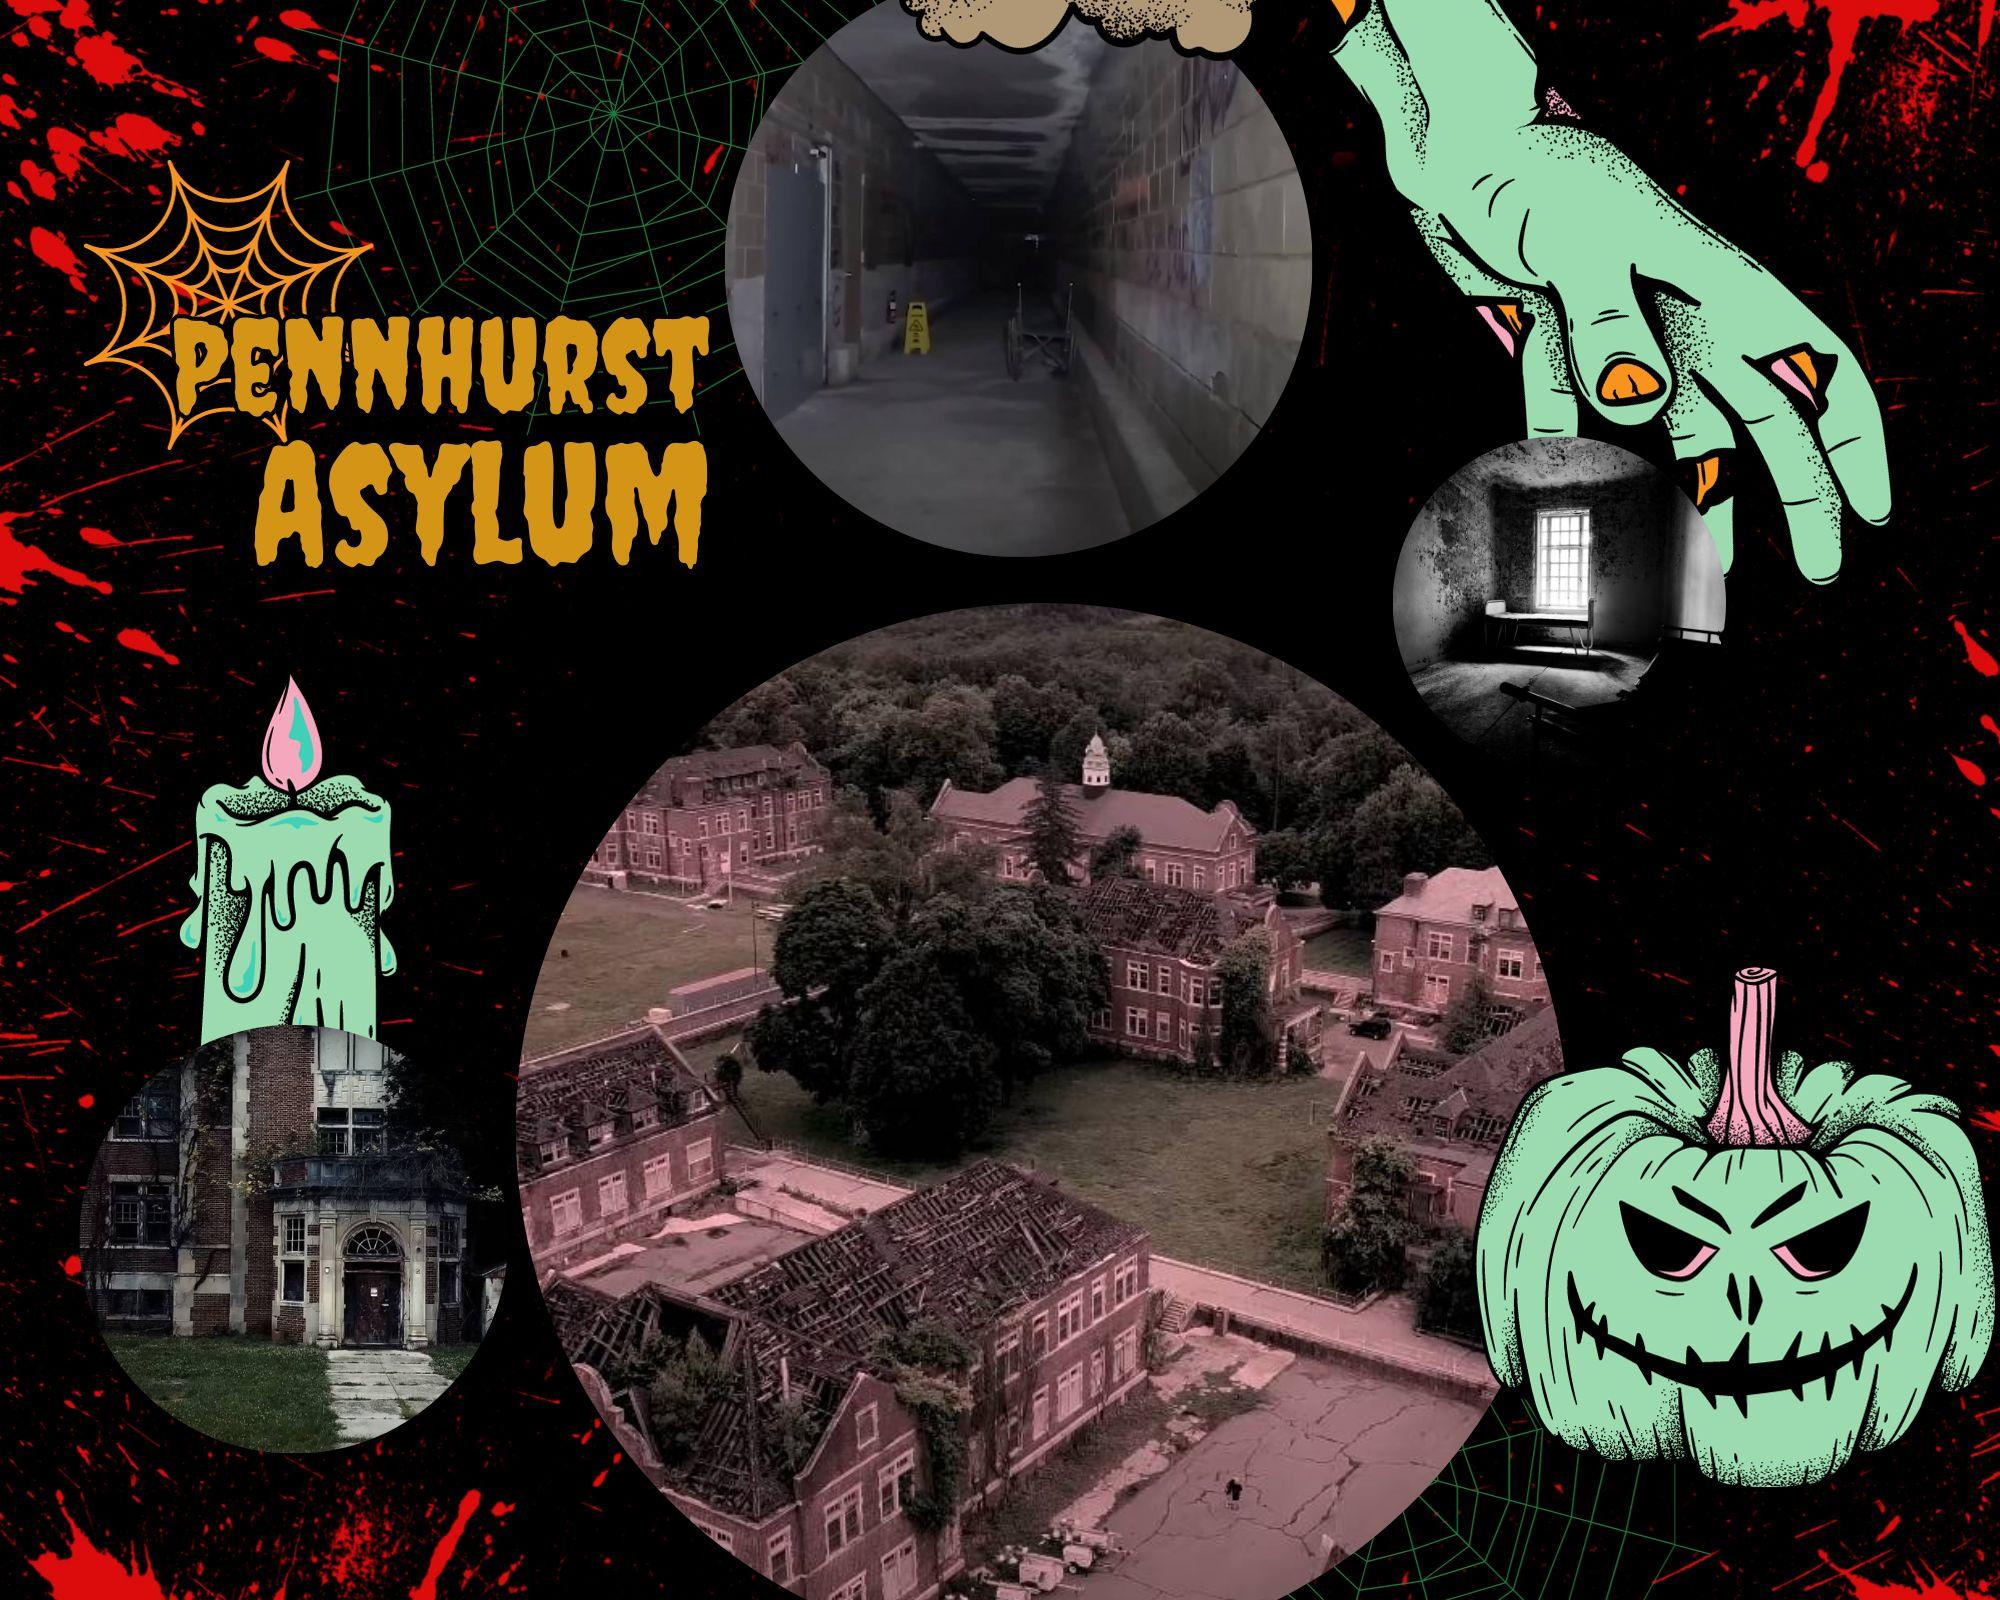 Pennhurst Asylum: Haunting Tales, Tours, Spooky Attractions!